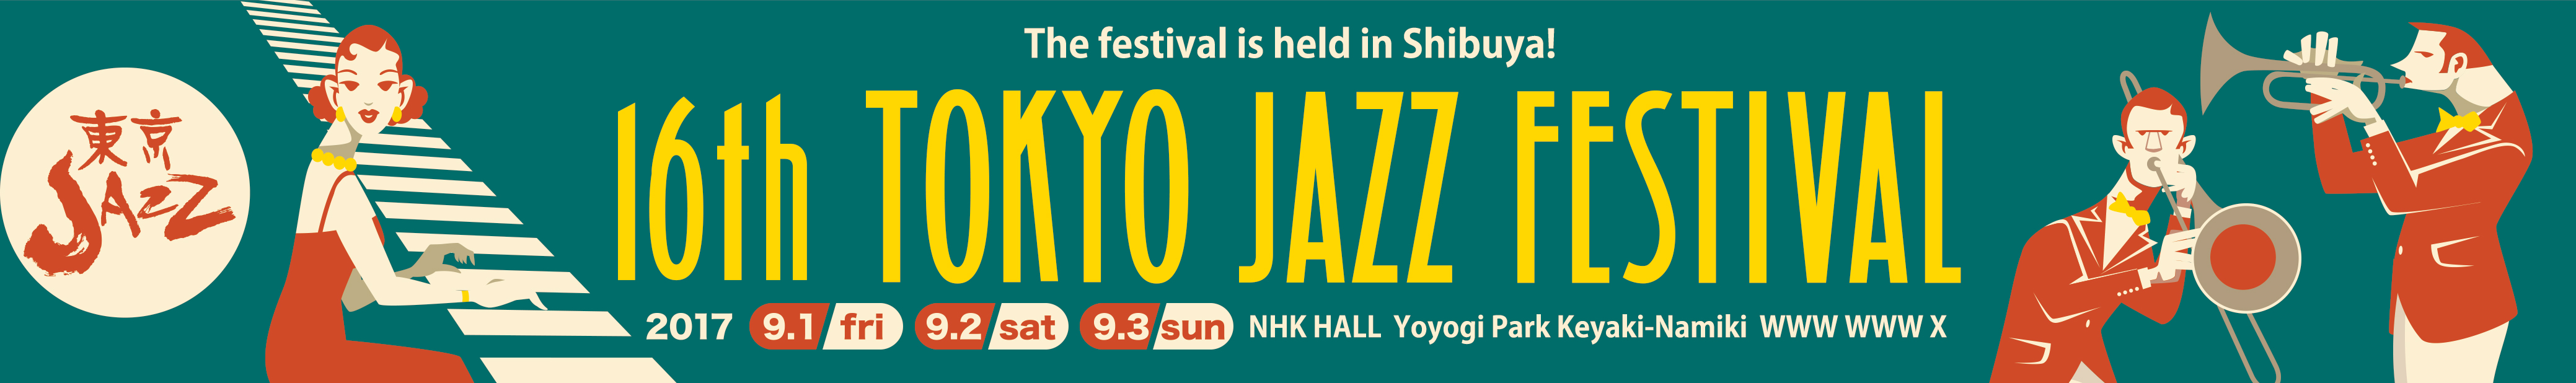 The 16th TOKYO JAZZ FESTIVAL